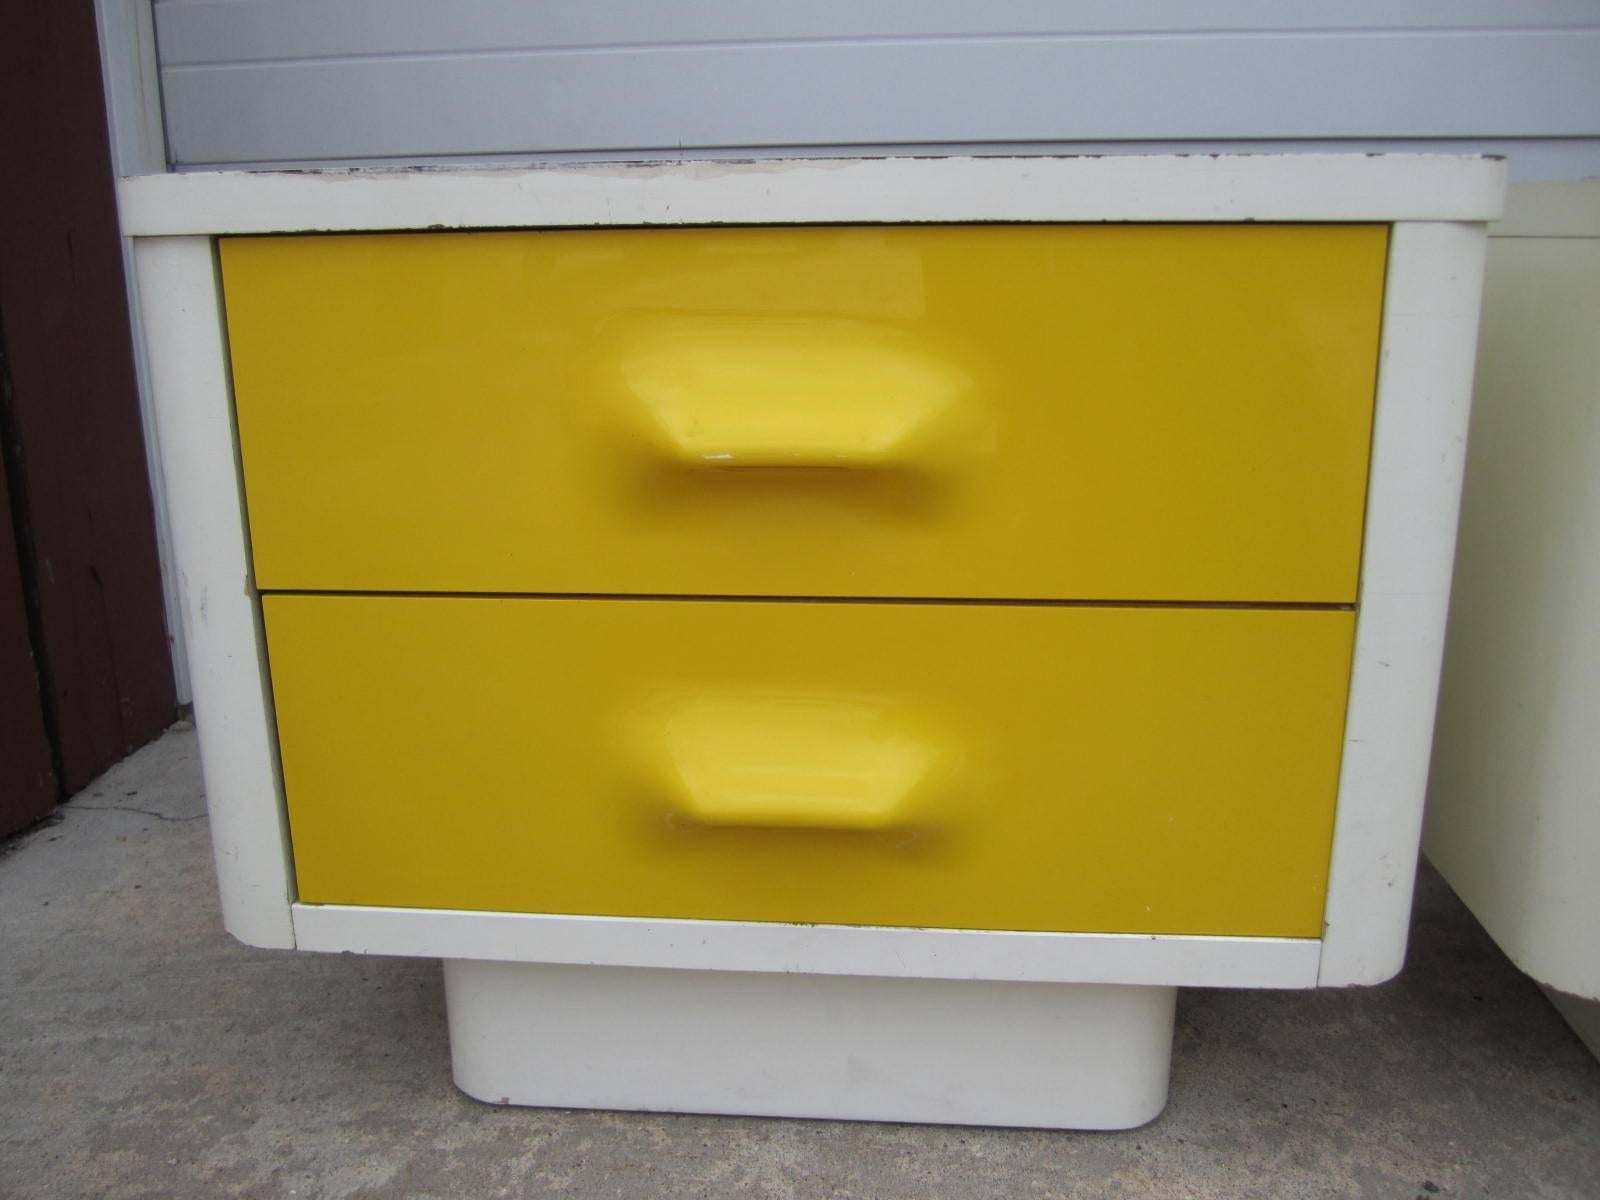 Space Age injection molded plastic drawer fronts. White laminate top over lacquered case. In very good condition. Manufactured by Broyhill, well crafted design. You will love these colorful piece in the bedroom or any living space.